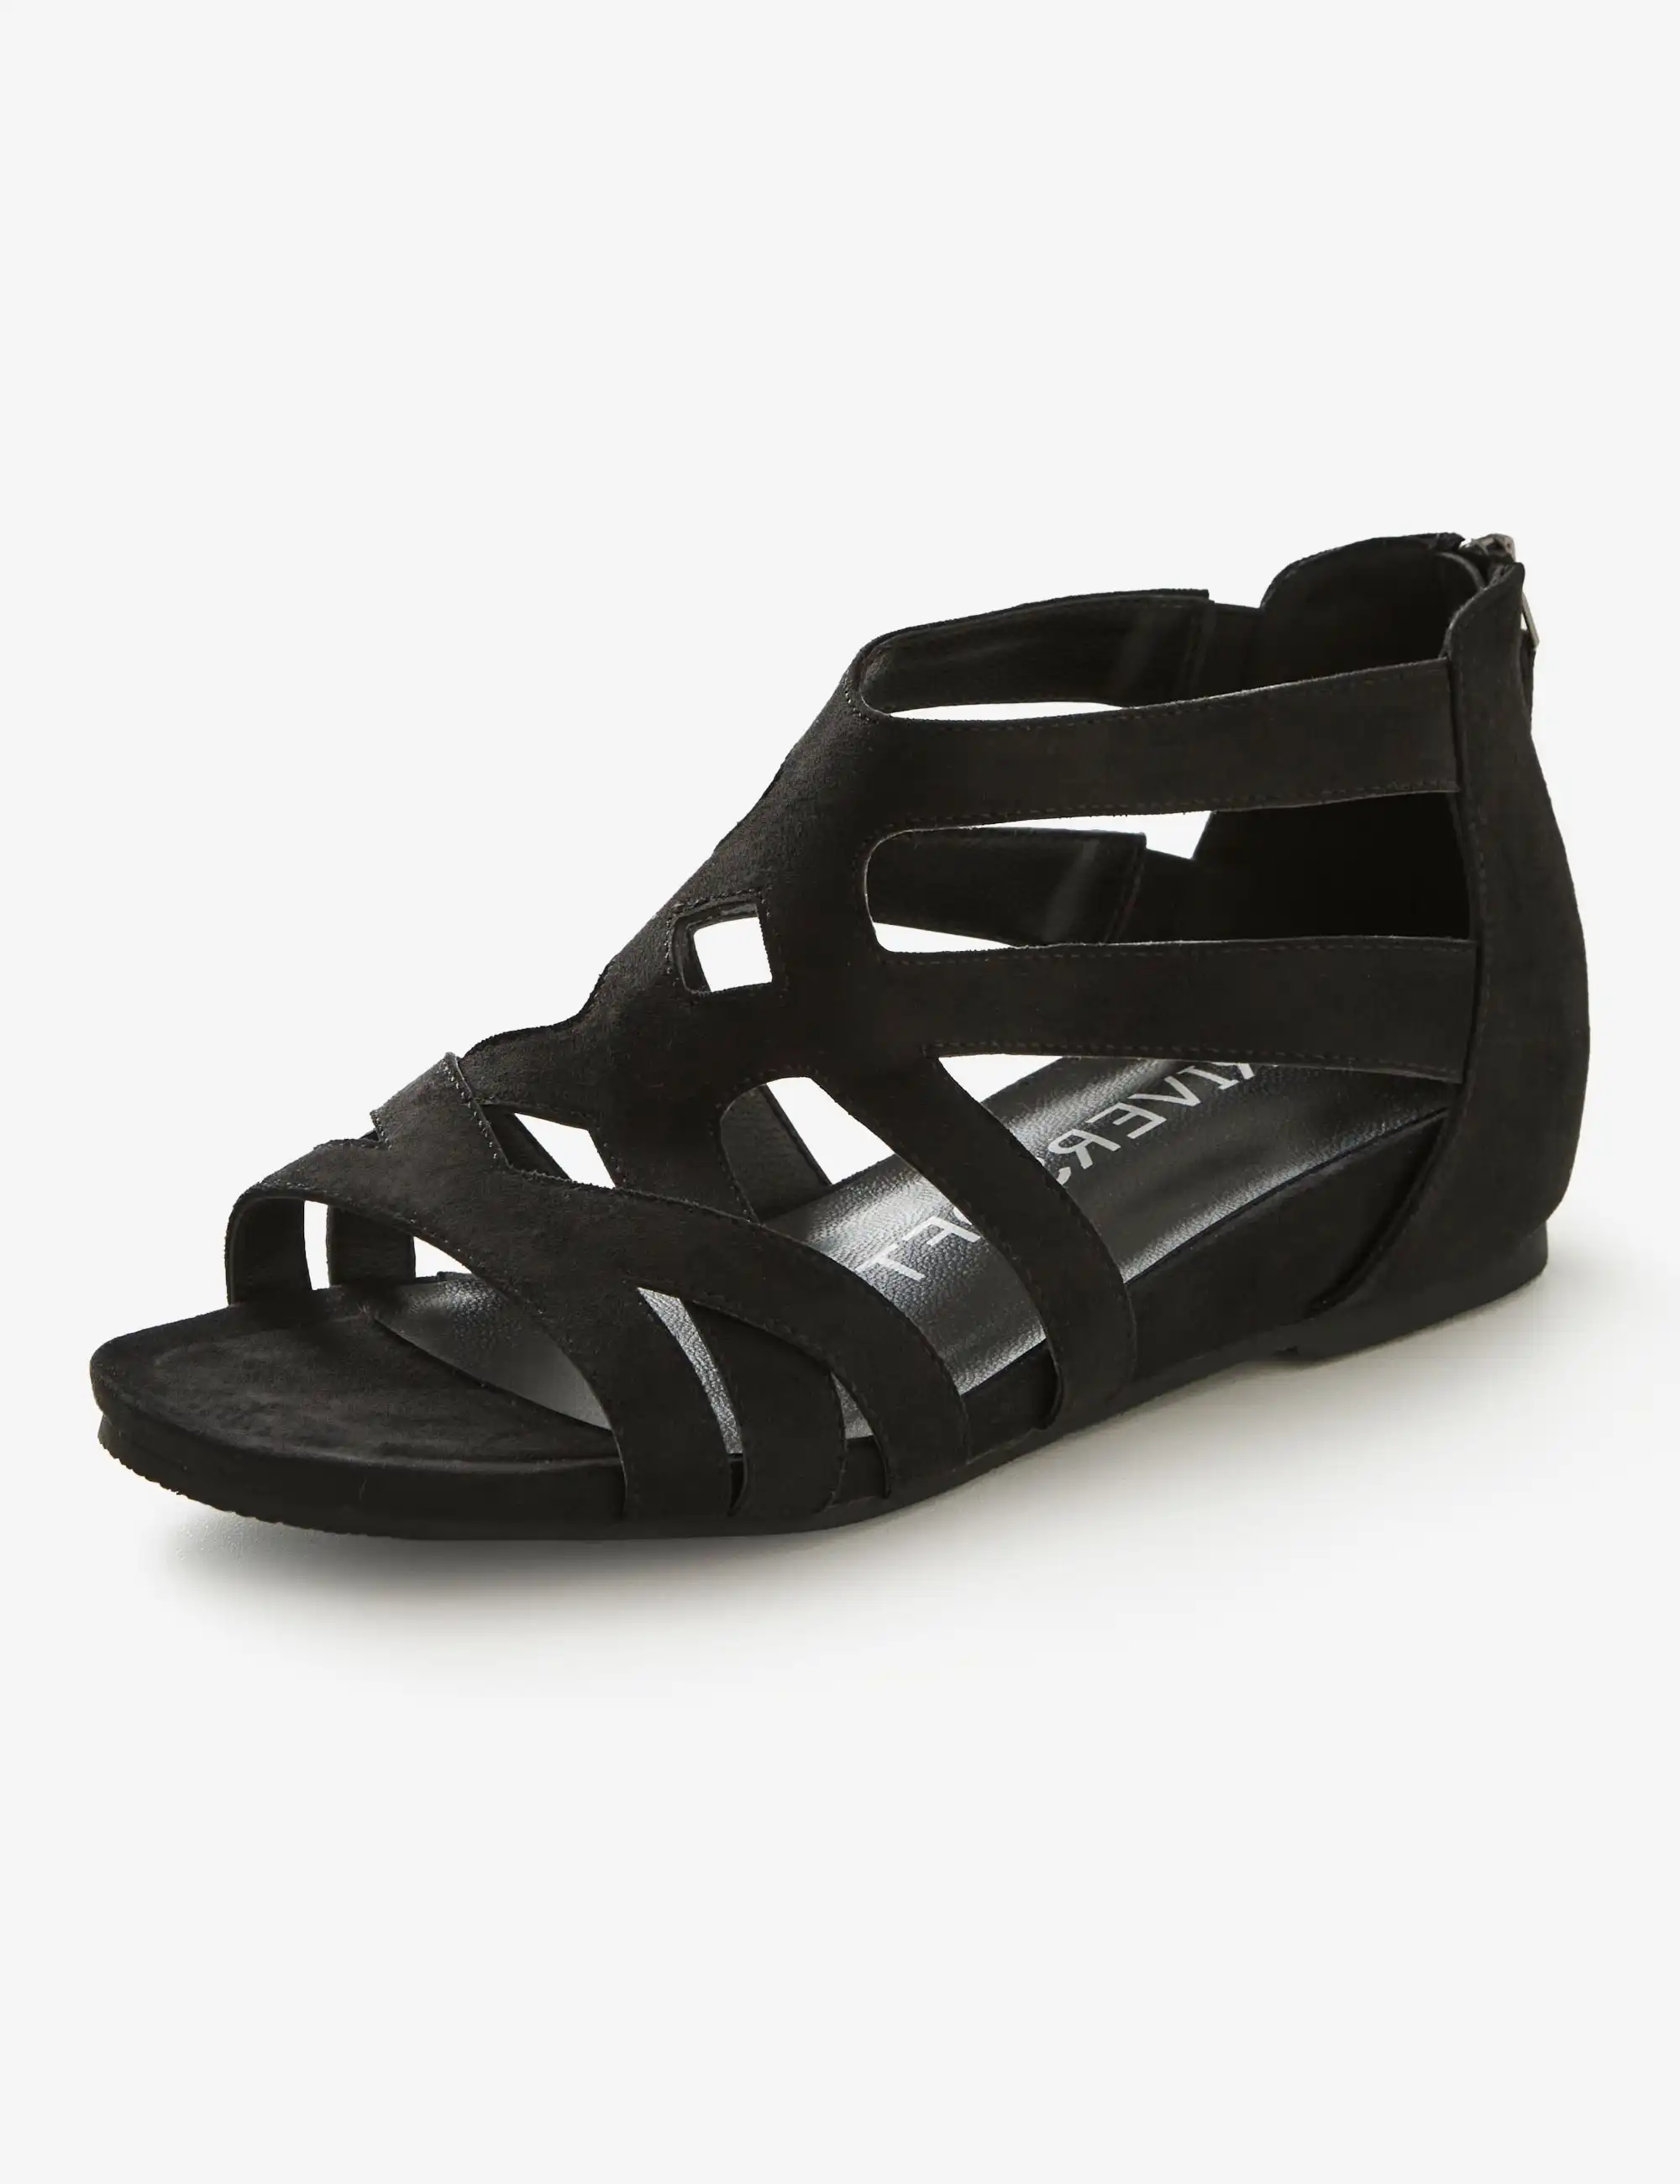 Kaipo Riversoft Caged Wedge Zip Sandal